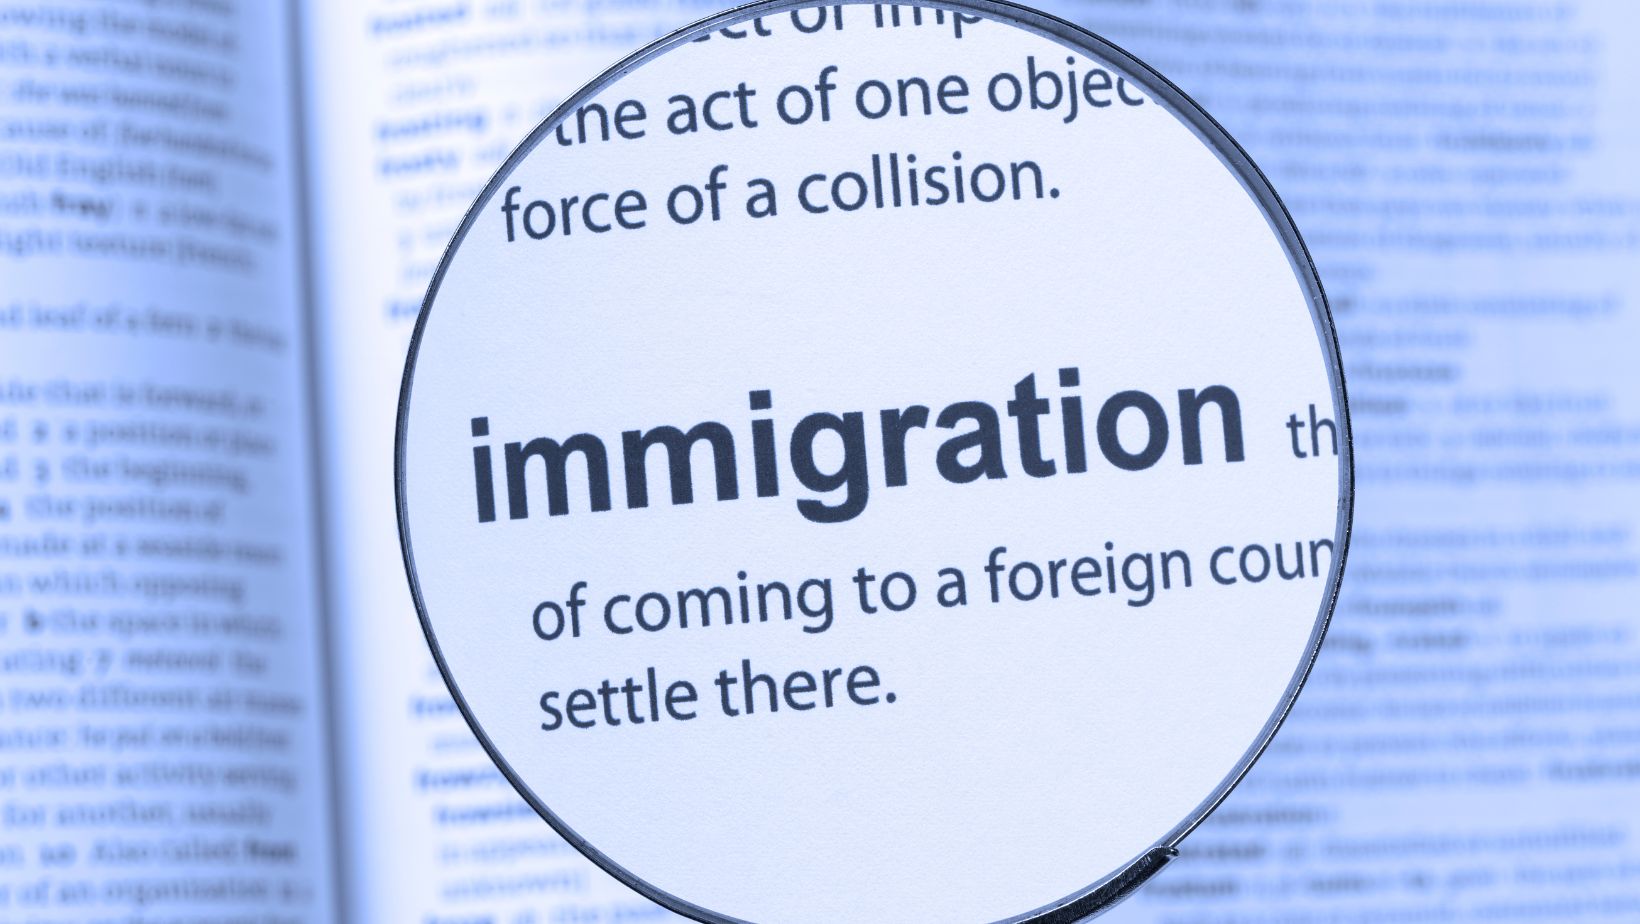 the immigration act of 1924 was considered outdated by the 1960s because